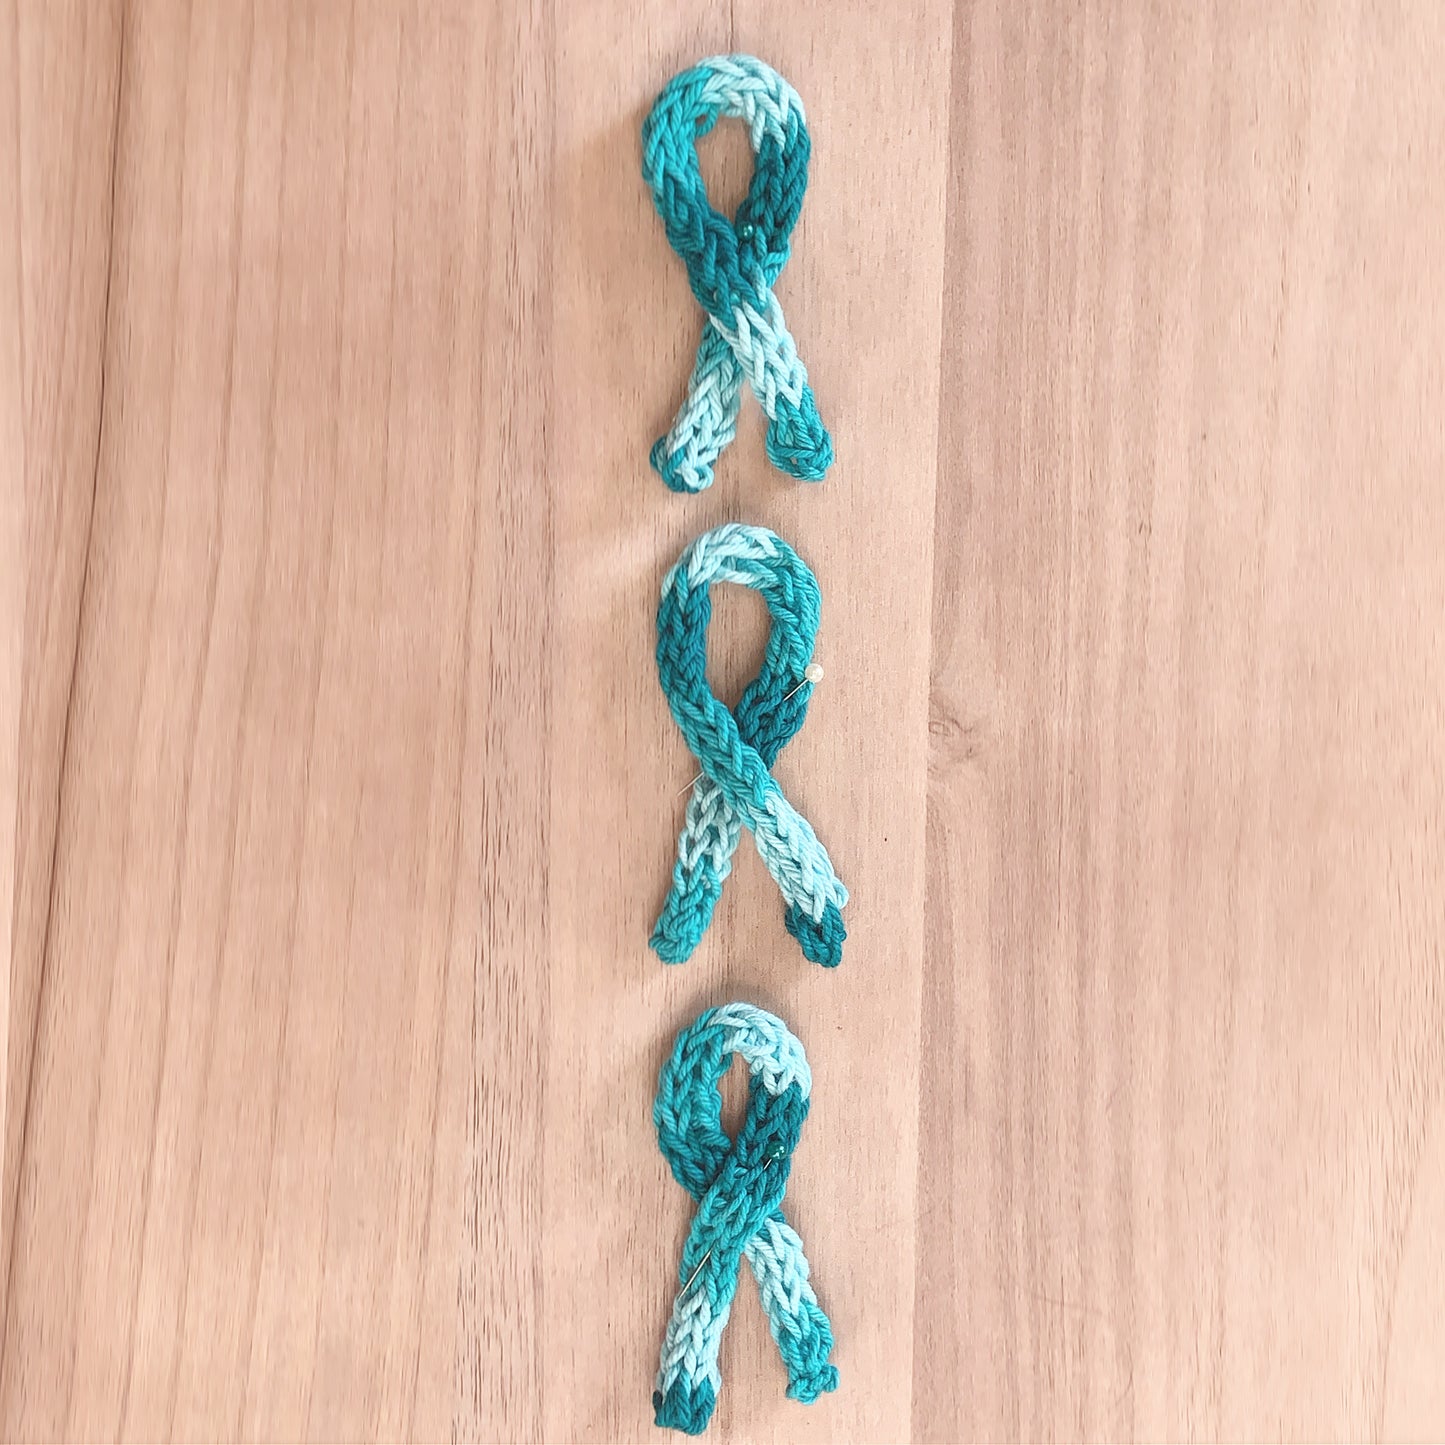 Cervical Cancer Awareness- Ribbon with Pin